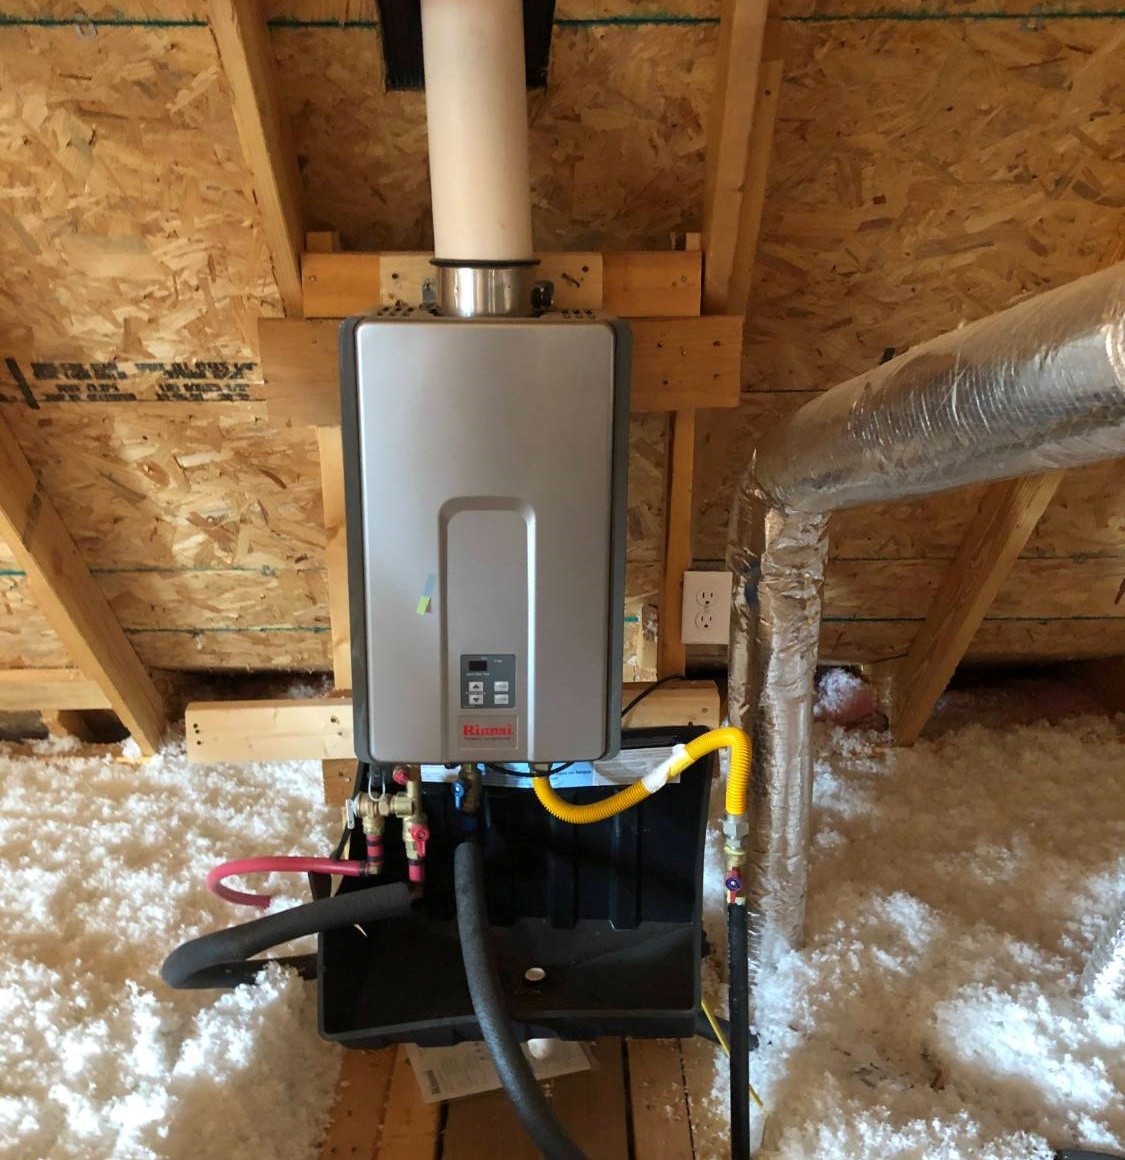 Pic of Tankless Water Heater in an attic